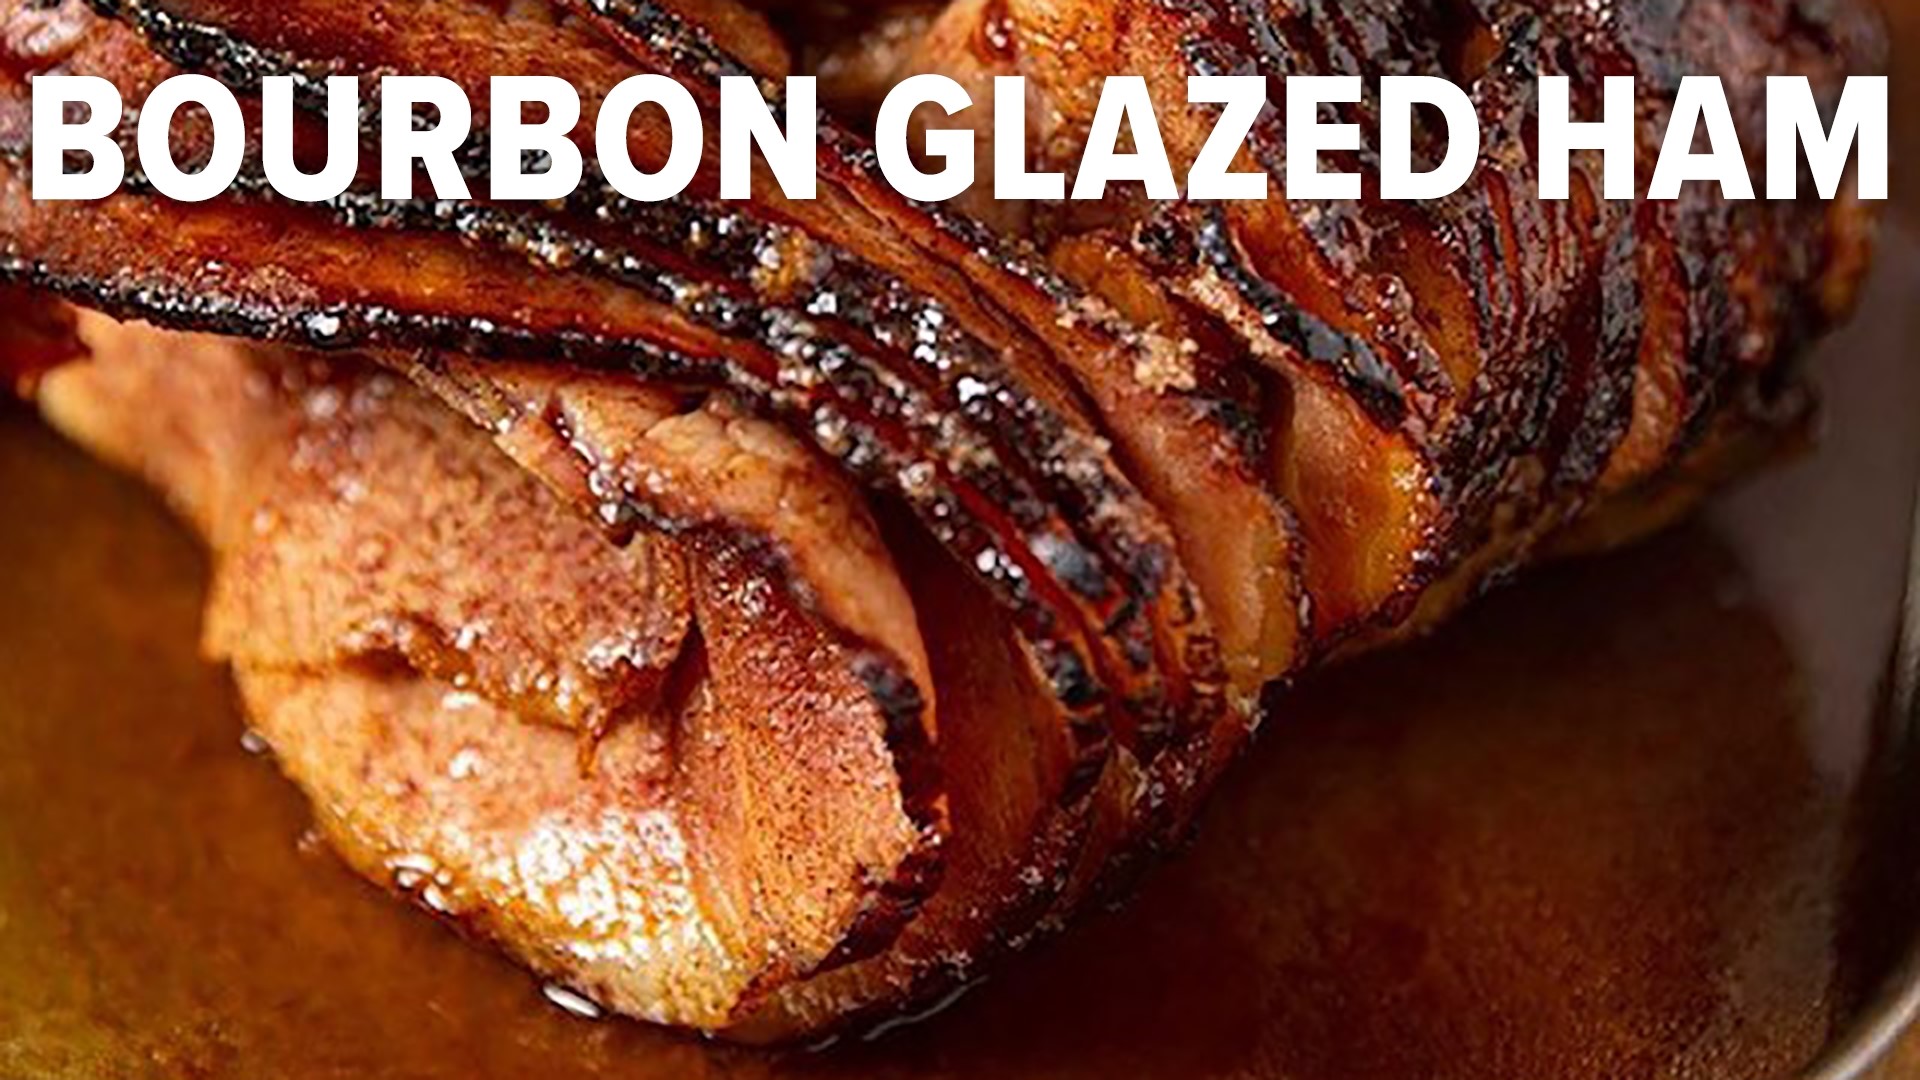 Chef Kevin makes a meal, fitting for the holiday season: bourbon glazed ham and potatoes.